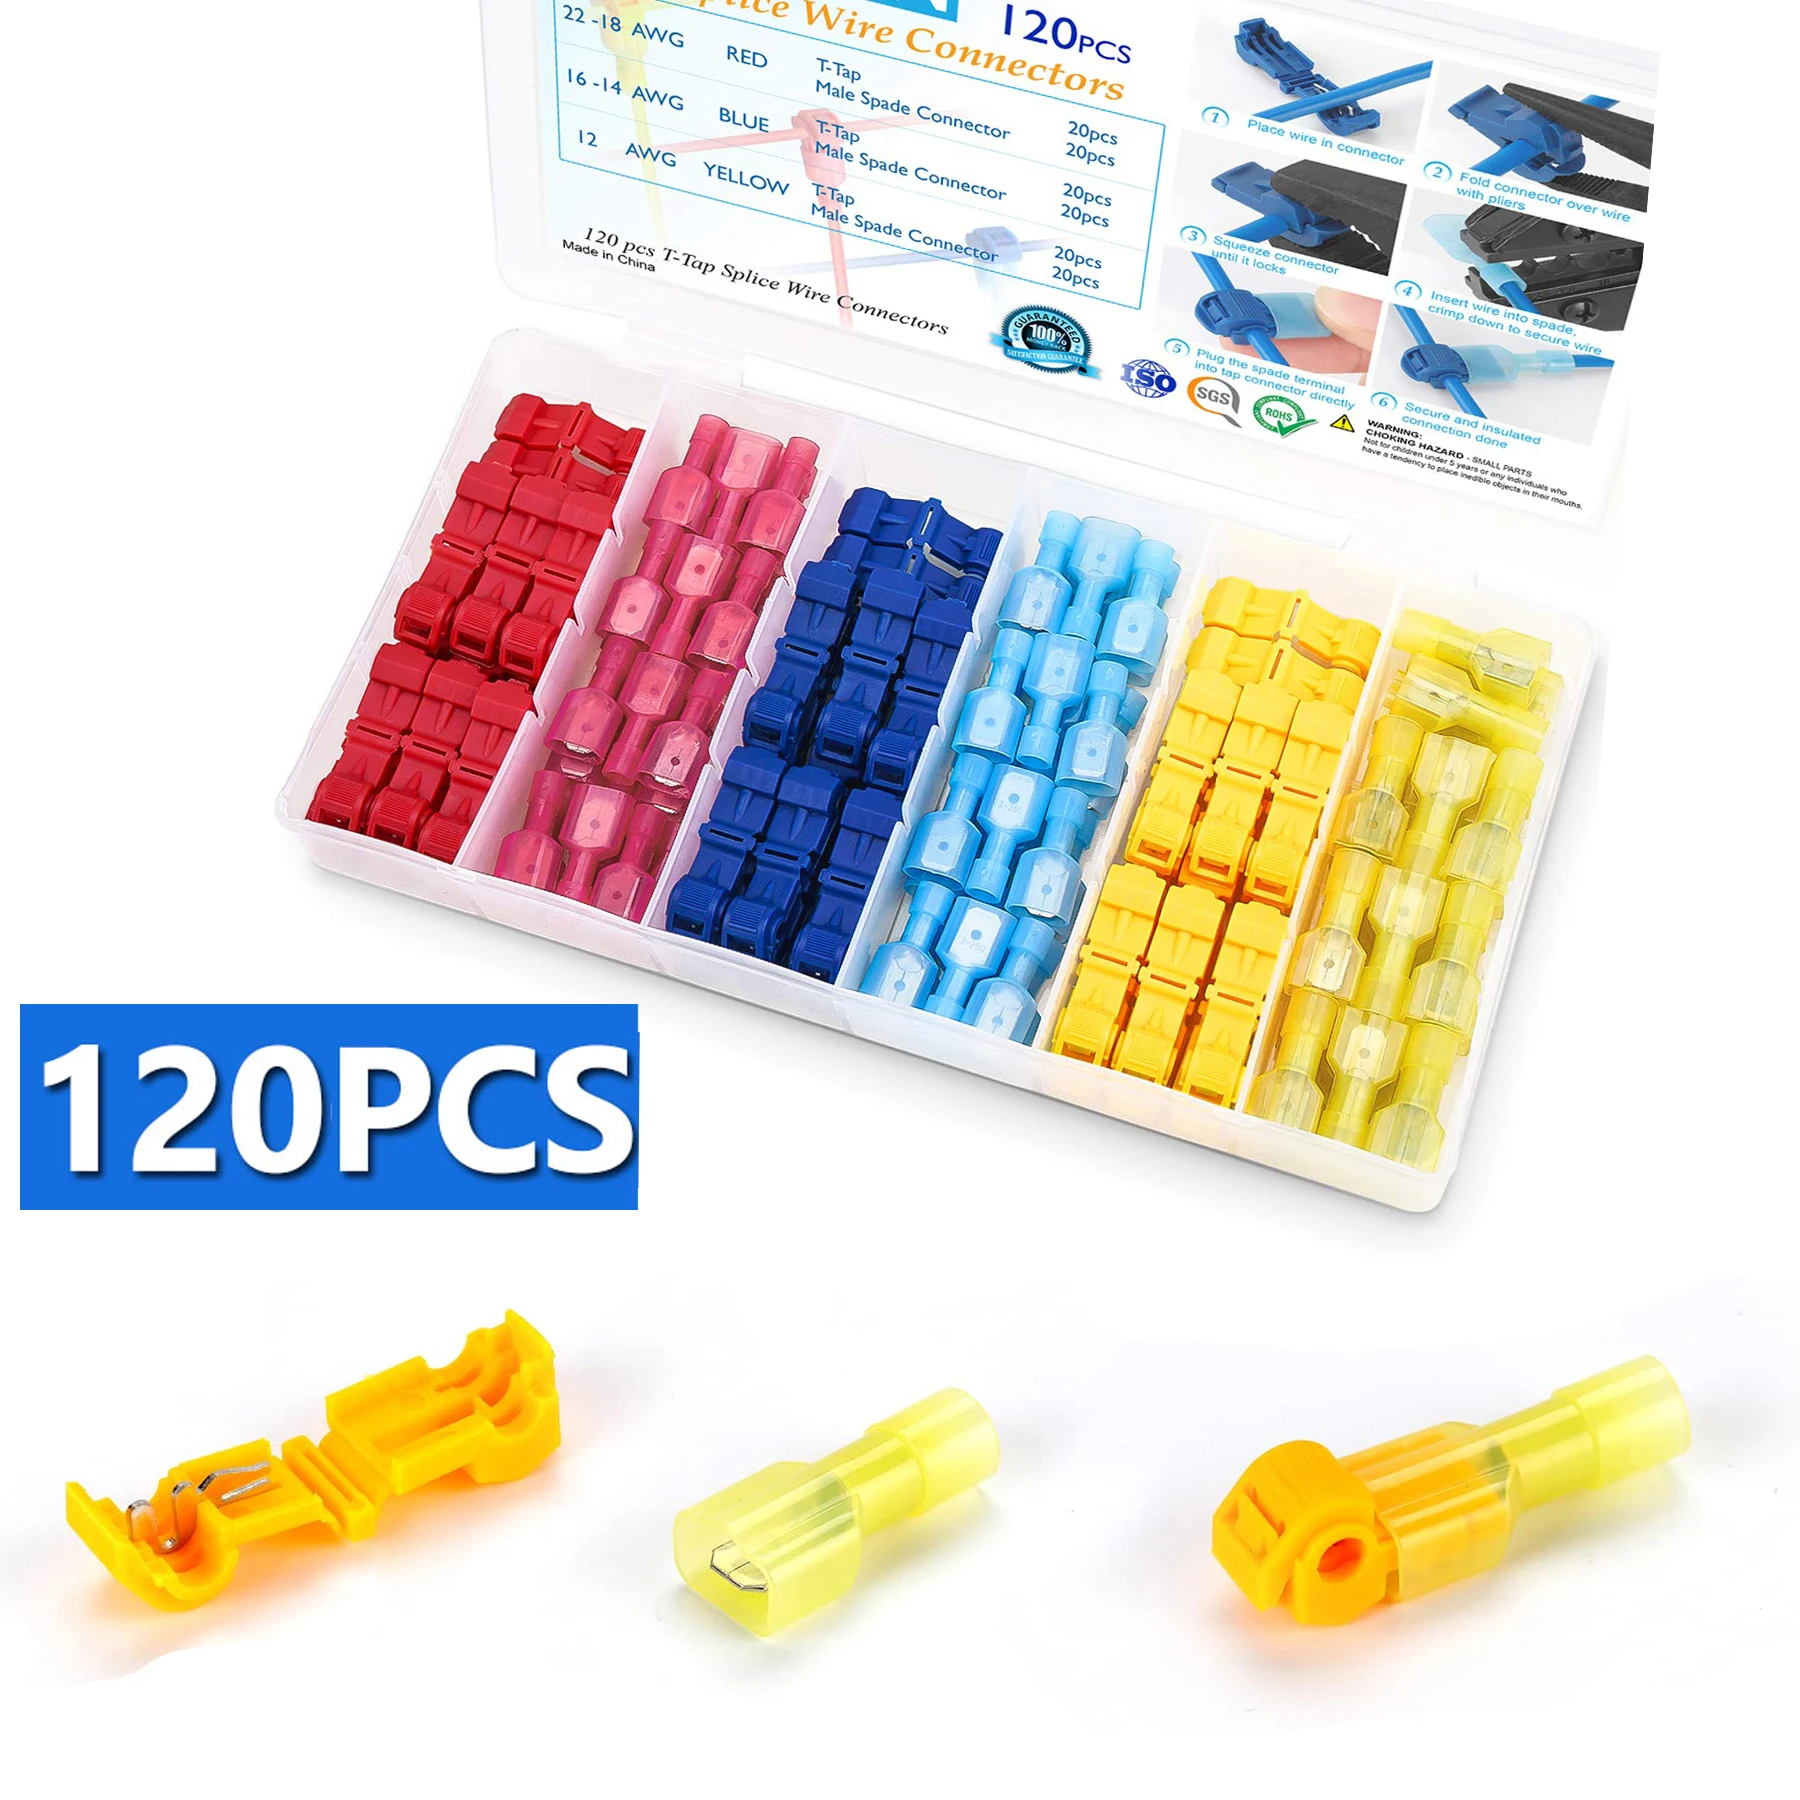 120 PCS Crimp Terminal Blocks Electrical Connector Connection Clamps T-Shaped Quick-Free Stripping Plugs Cable Connector Plug